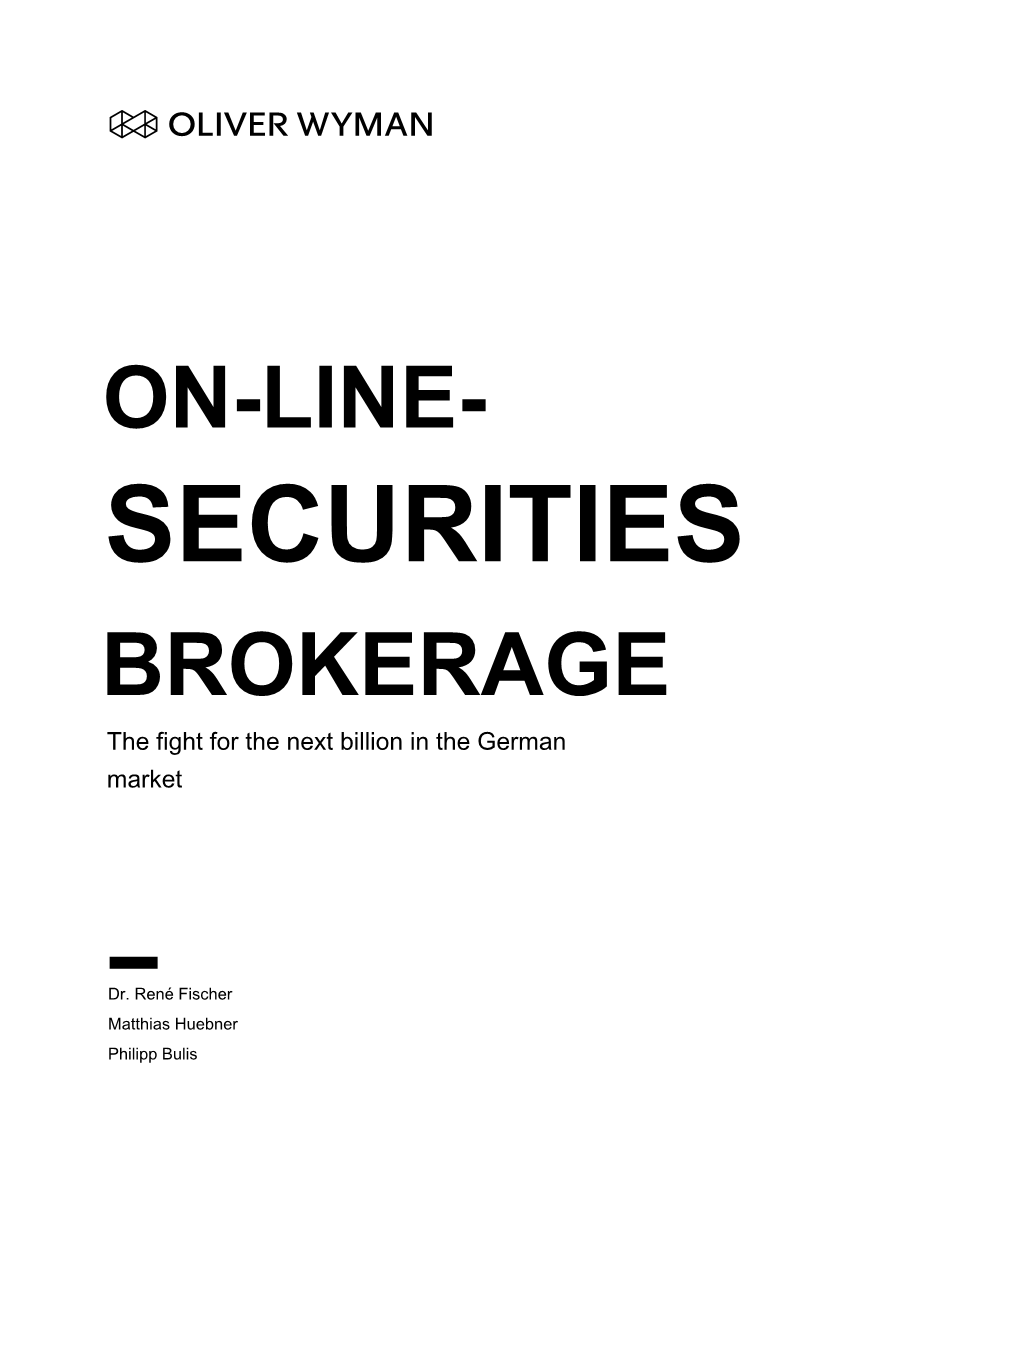 SECURITIES BROKERAGE the Fight for the Next Billion in the German Market